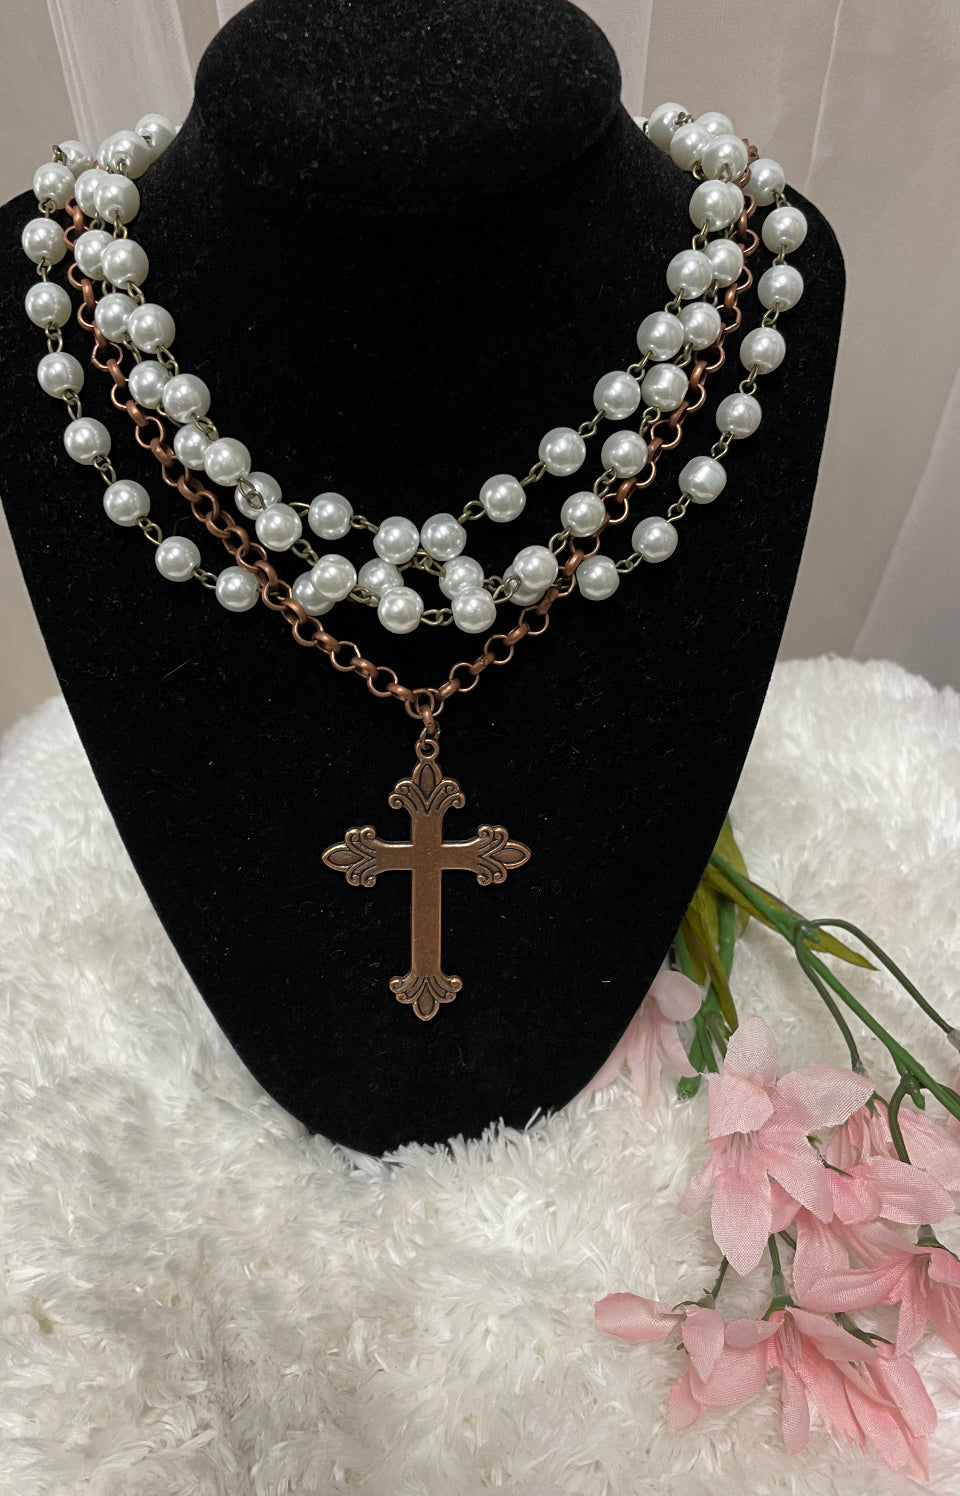 Pearl and Copper Collar Length Necklace with Copper Cross